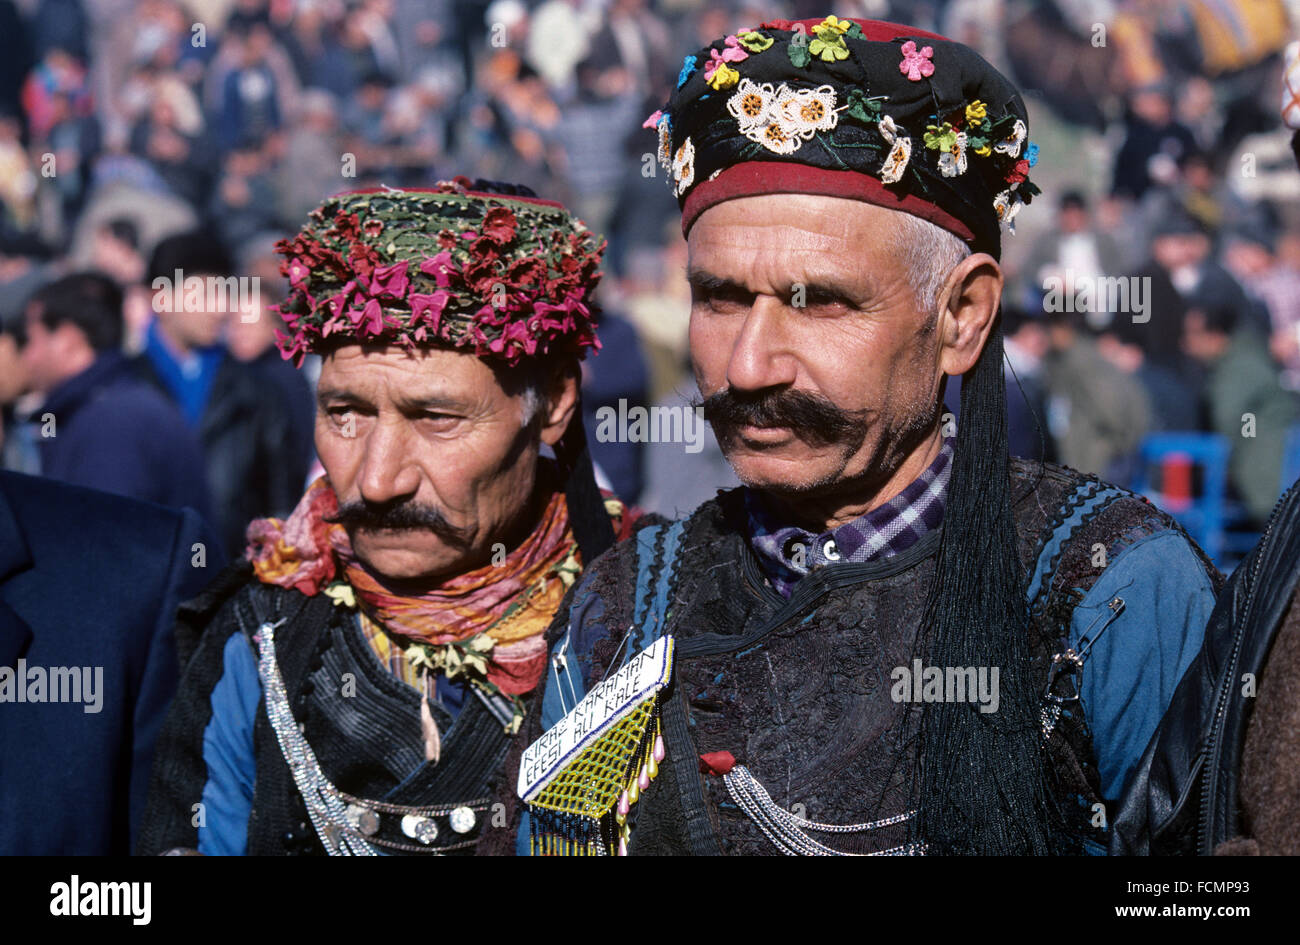 Two Turkish Men Wearing Moustaches and Traditional Turkish Dress, or Traditional Aegean Military Costume, known as Zeybek and Head Wear at the Annual Camel Wrestling Championship, Ephesus, Turkey Stock Photo